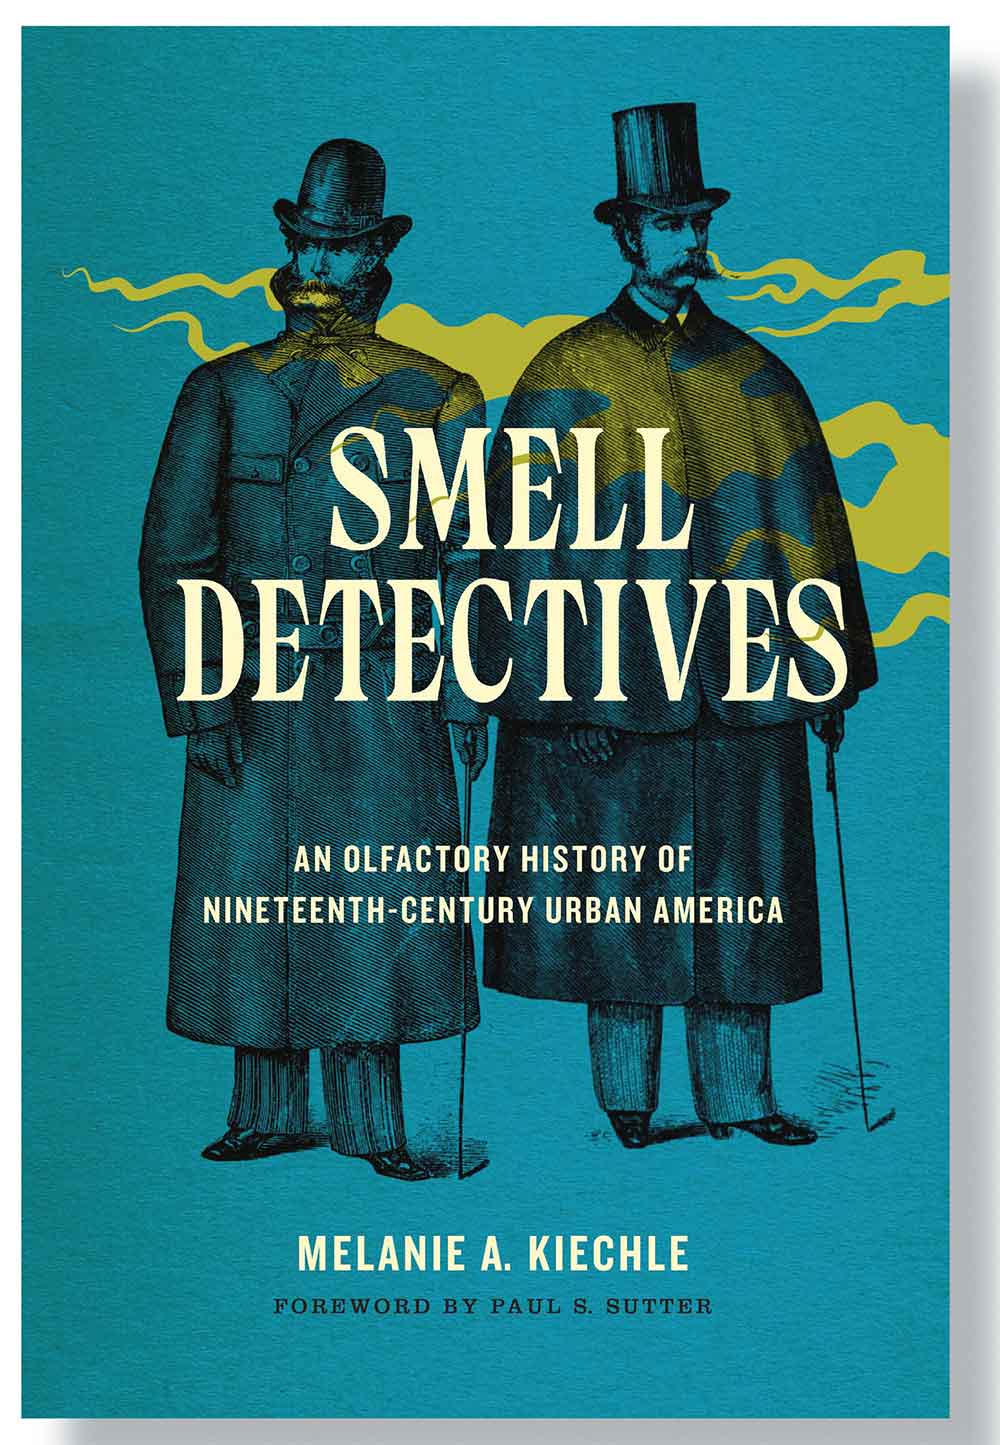 Cover - Smell Detectives